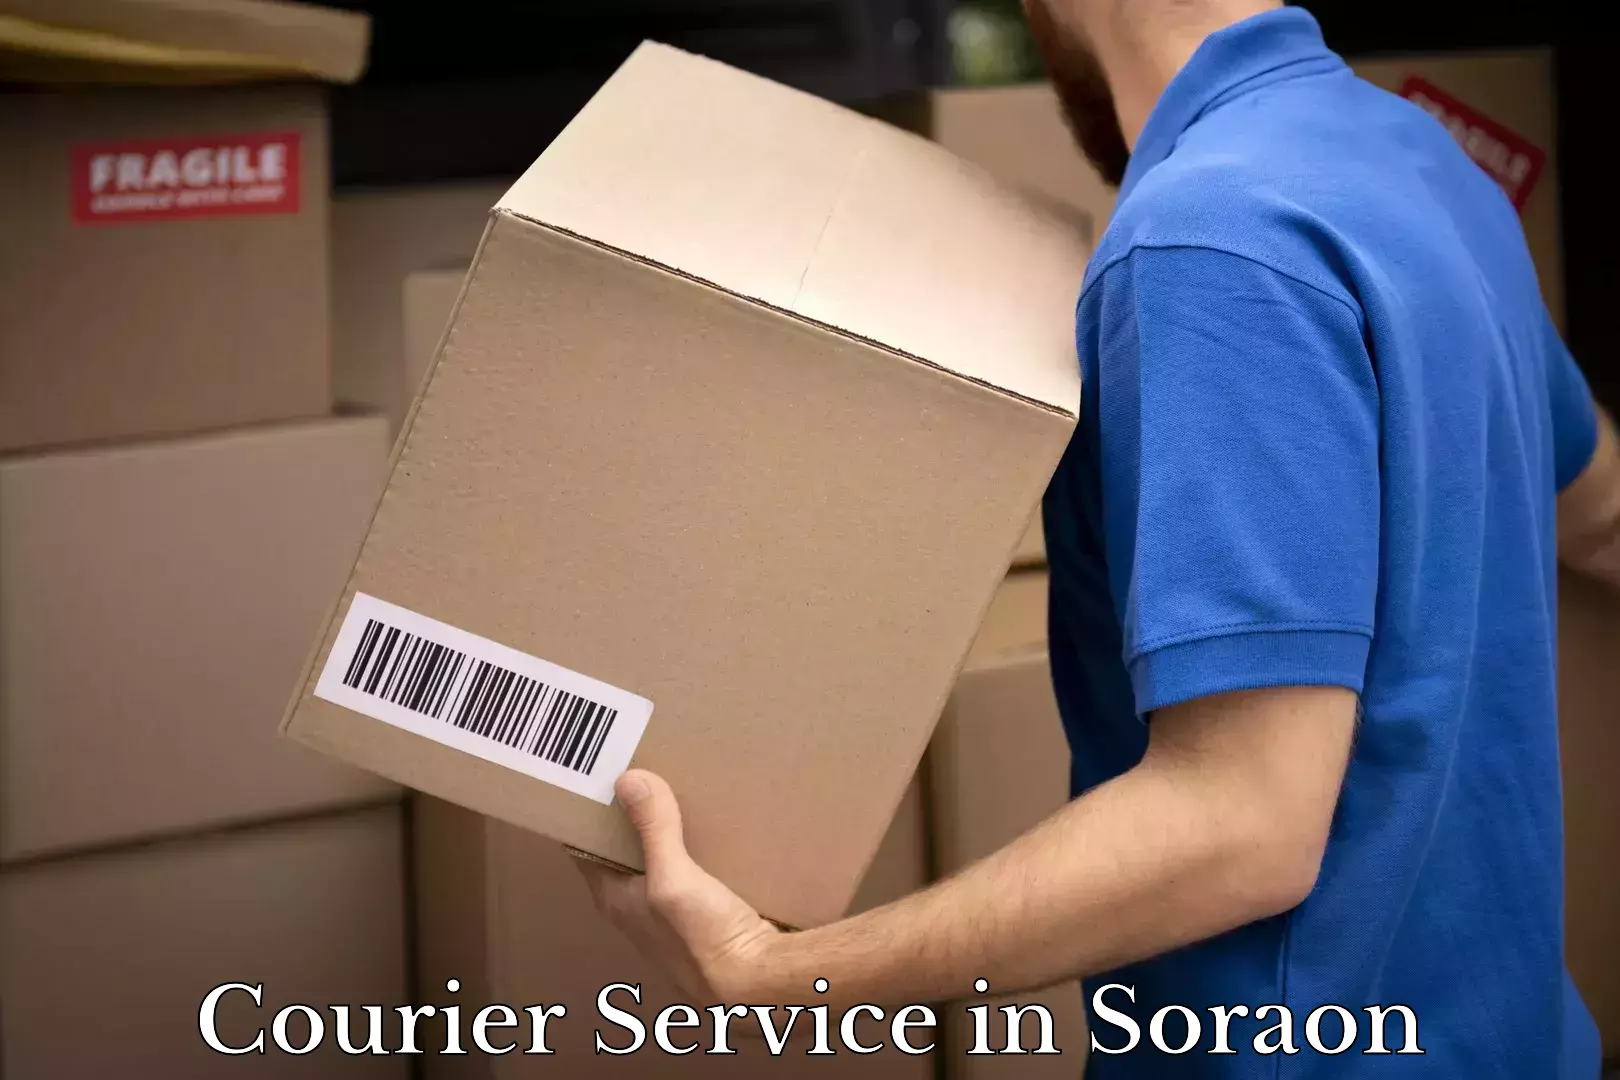 Seamless shipping experience in Soraon